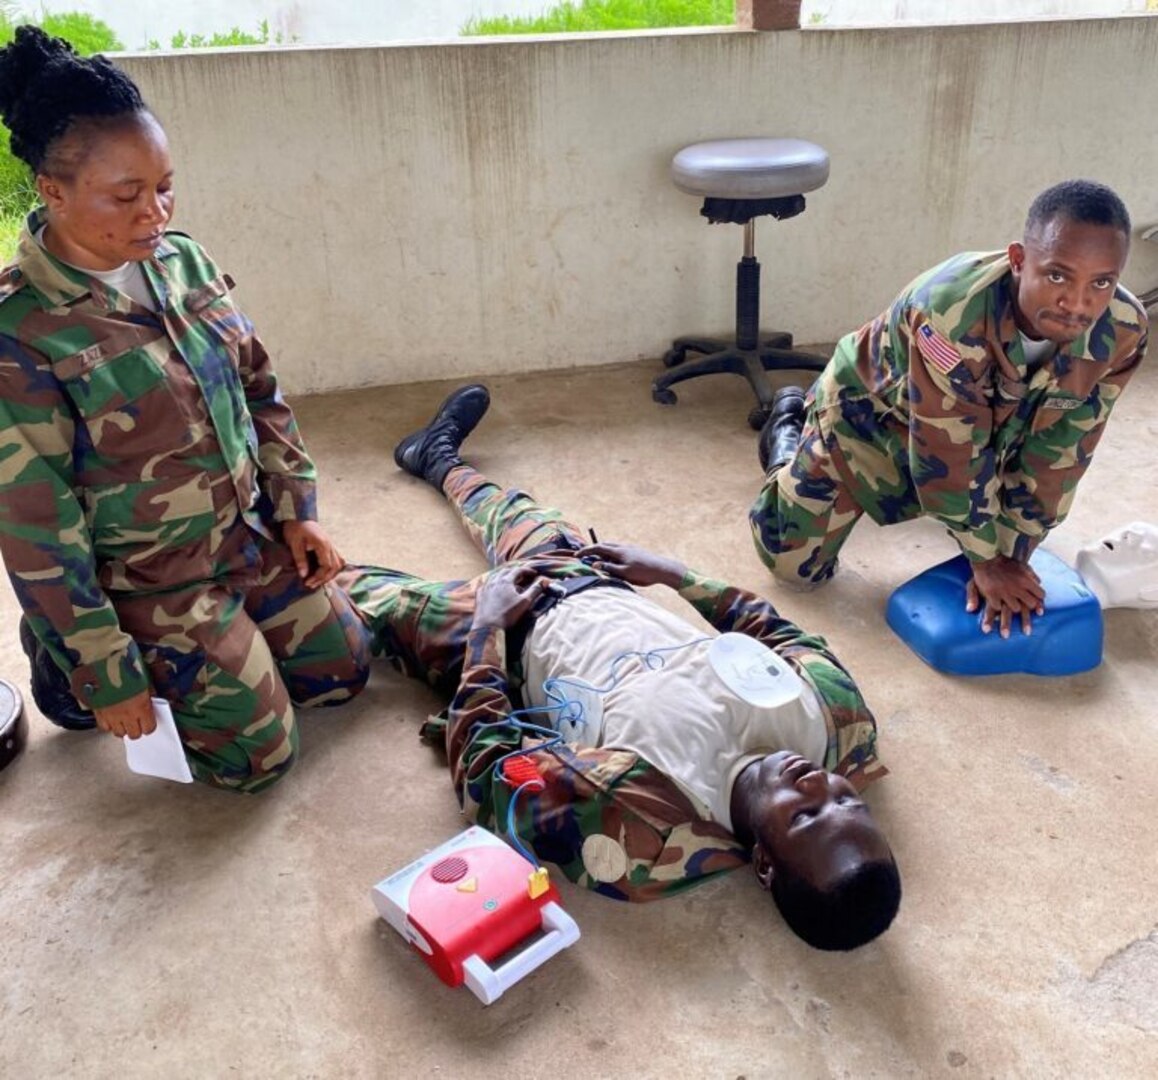 The Michigan National Guard provides emergency medicine mentorship to members of the Armed Forces of Liberia (AFL) at 14 Military Hospital in Latvia.